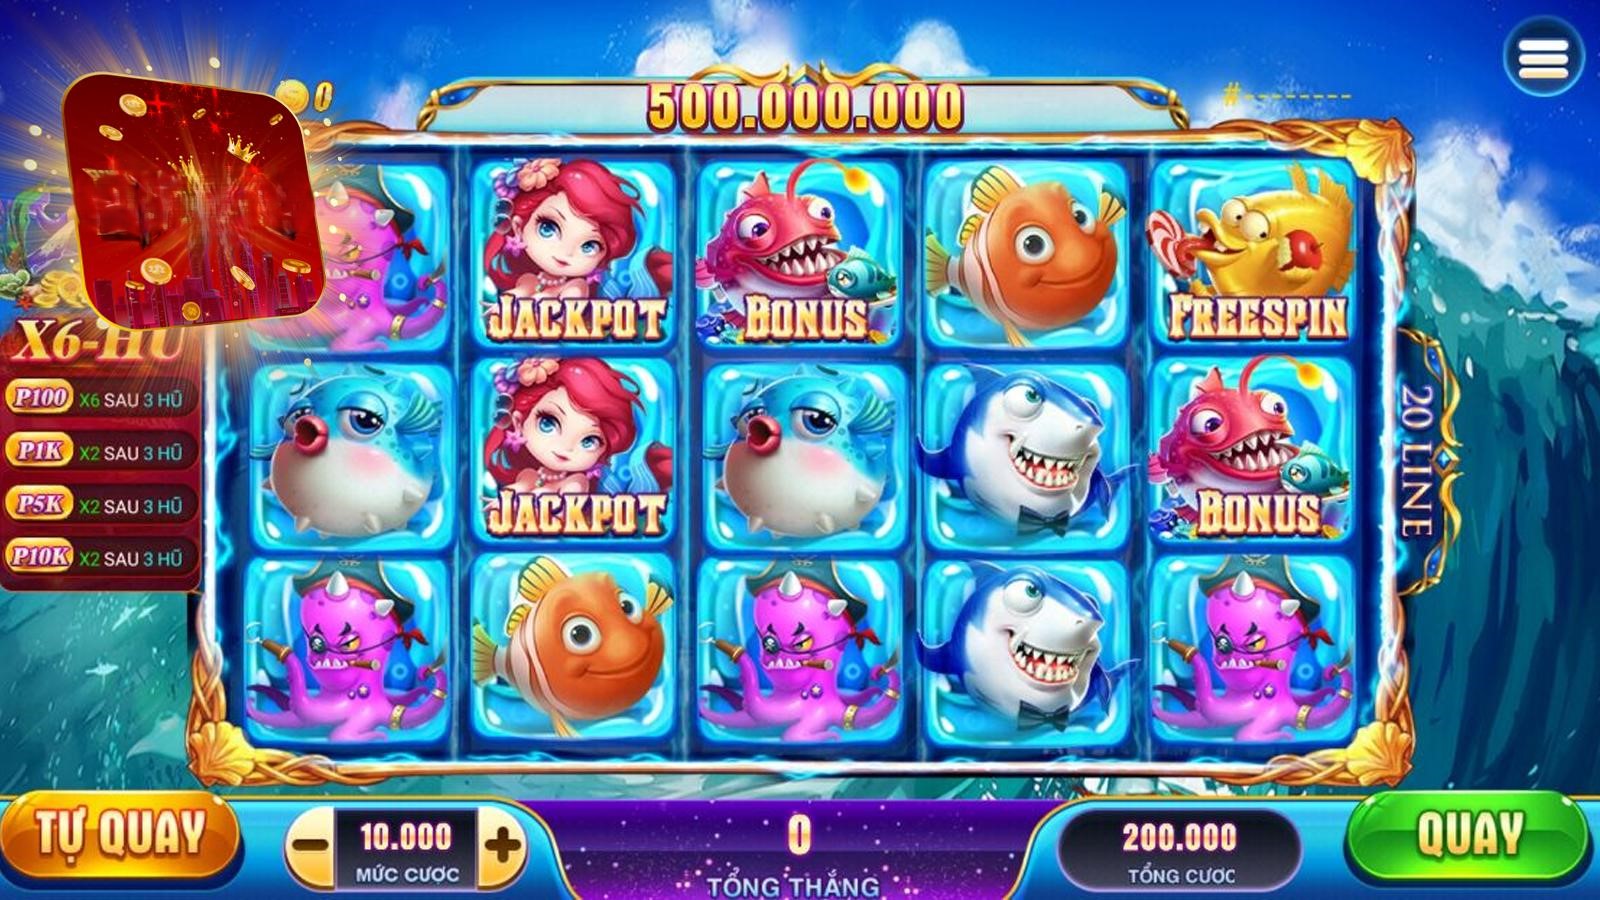 slot game thuy cung